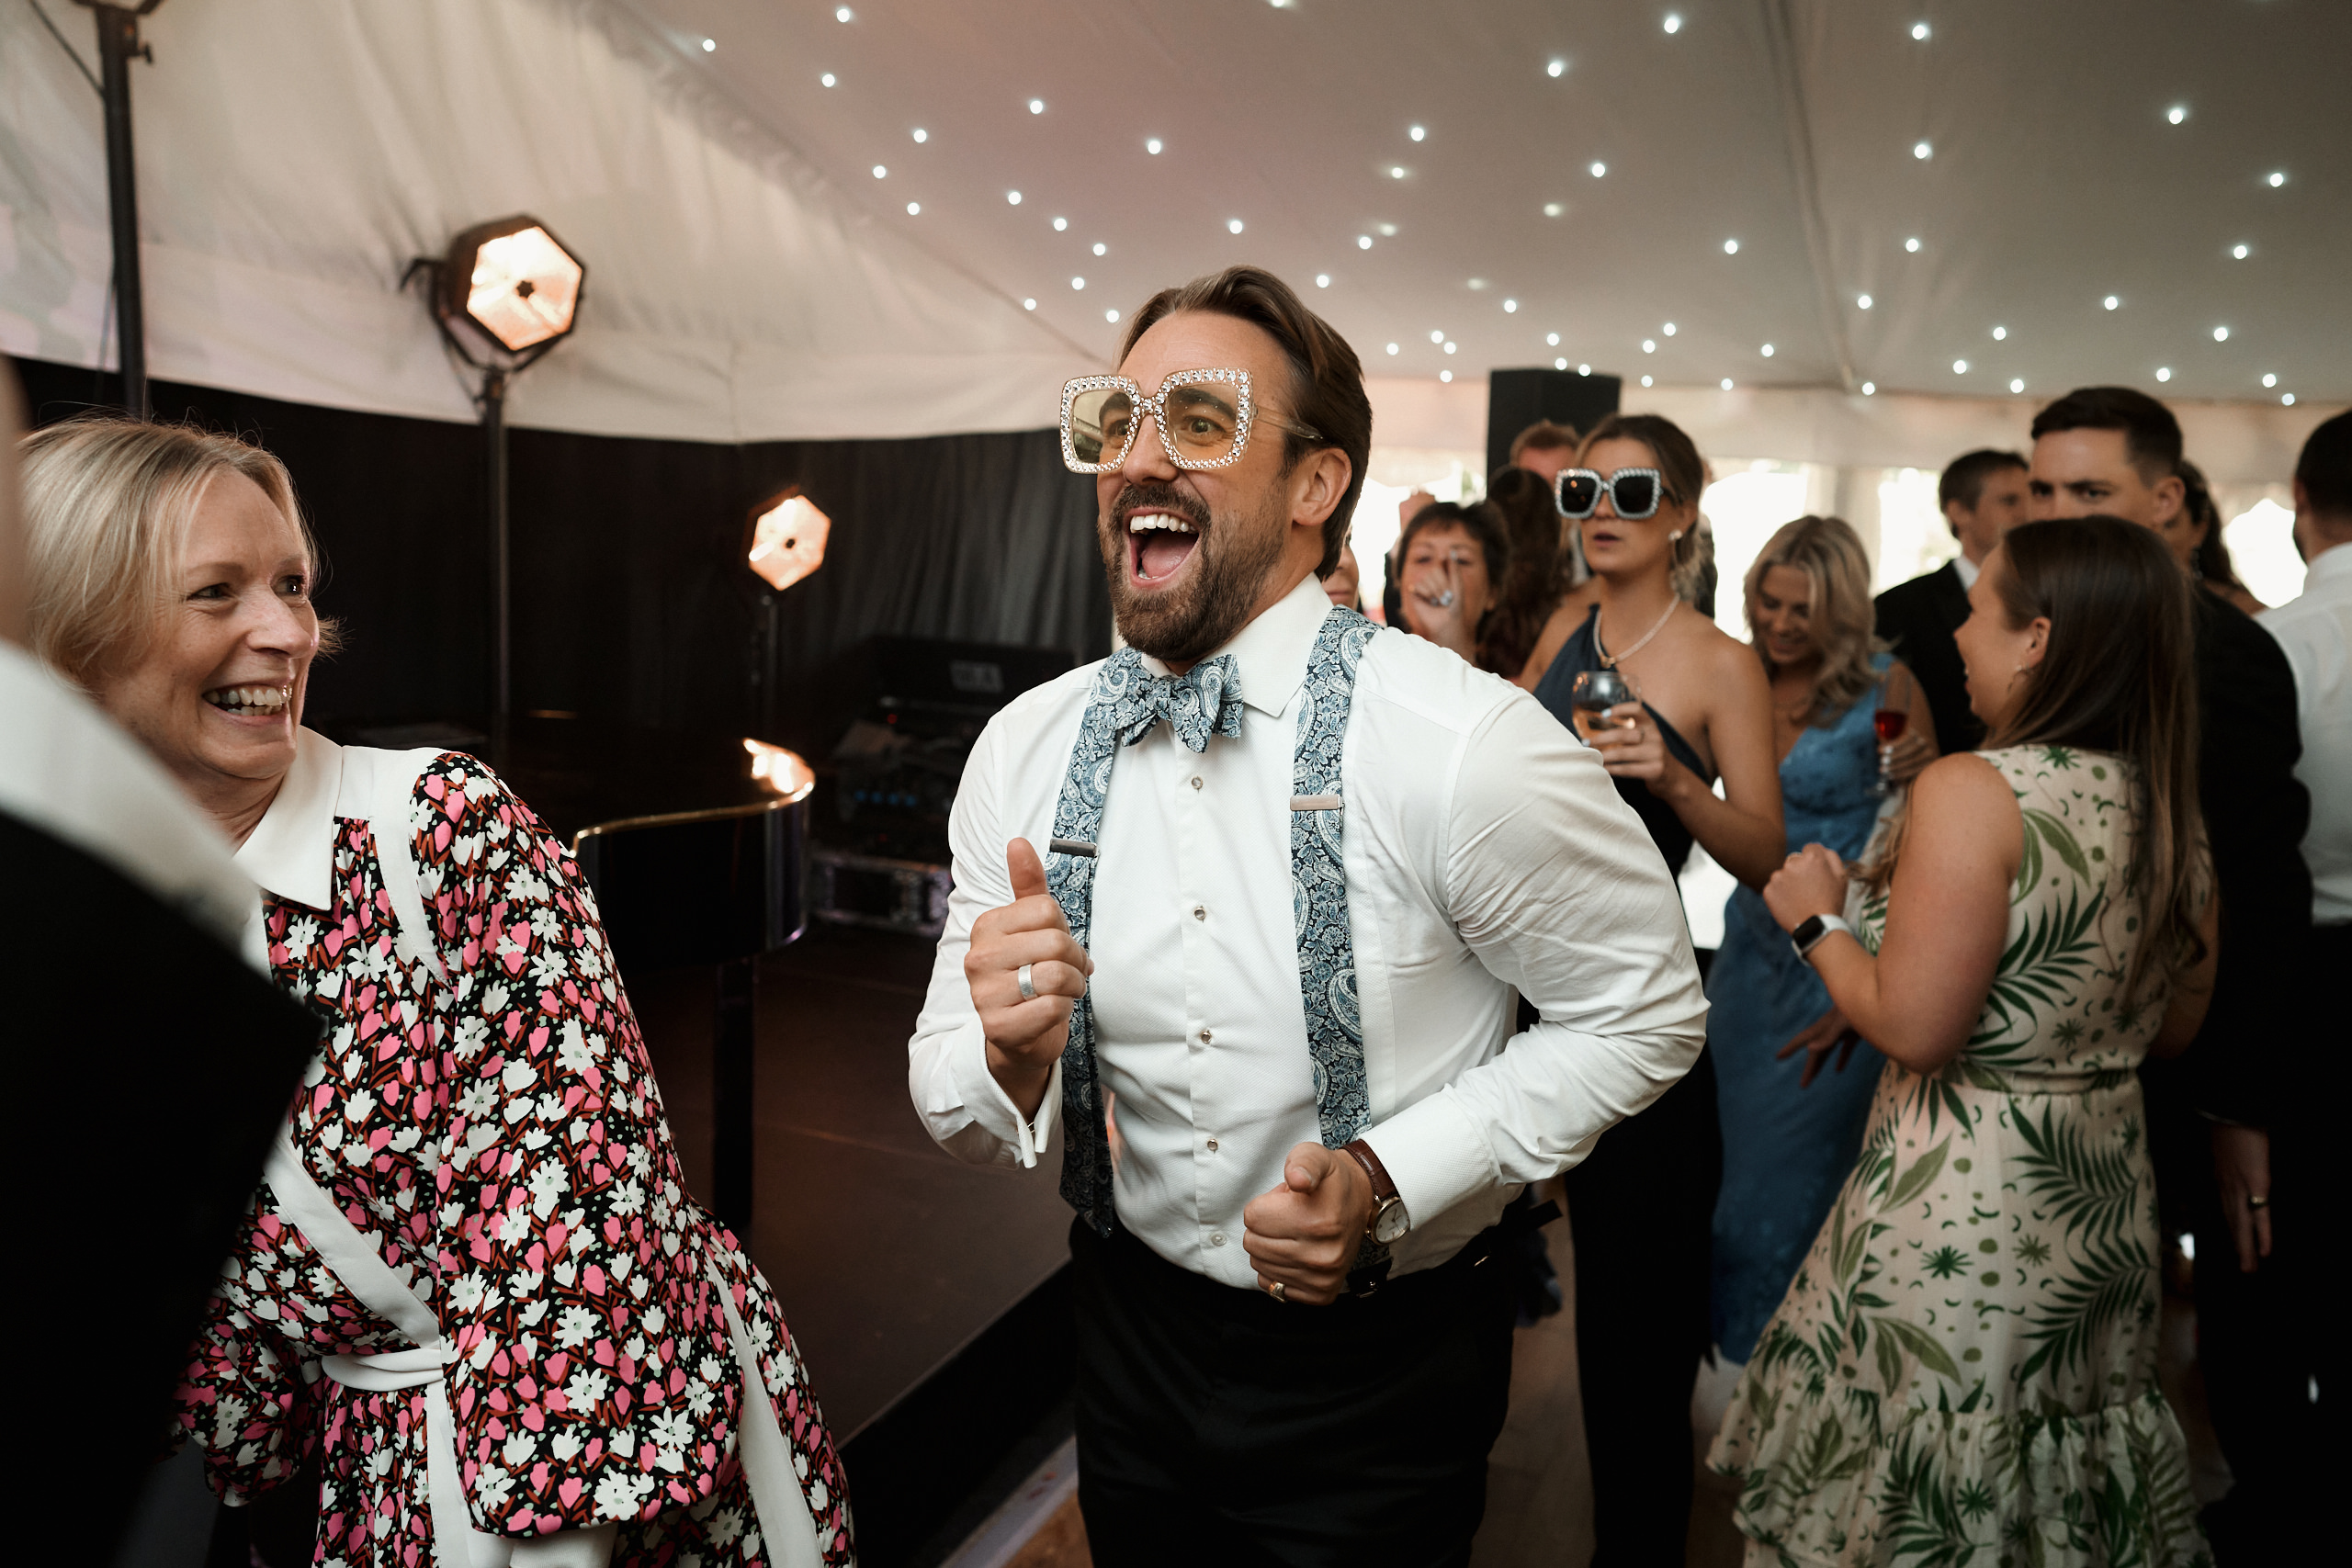 A guy in sunglasses and a tie is busting some moves in a tent.